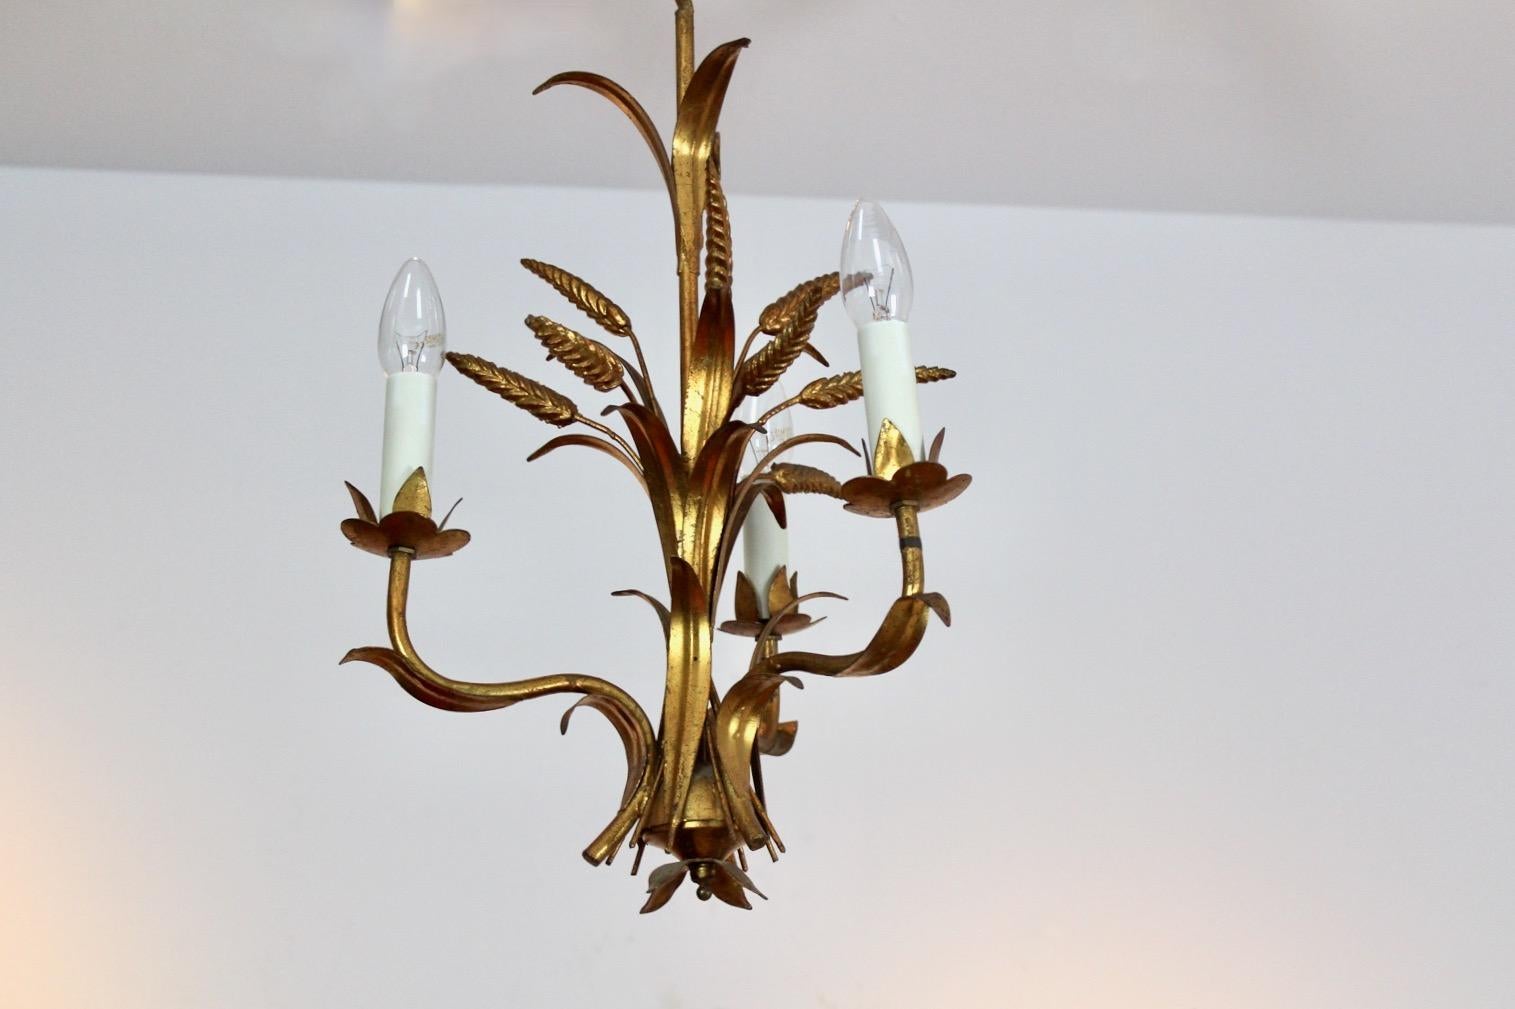 Exotic Hollywood Regency style gilt wheat sheaf chandelier. Designed in Germany by Hans Kögl in the1970s. This classy and rare lamp has three lights mounted in holders with faux candle covers and beautiful gilded floral metal leaves. The lamp is